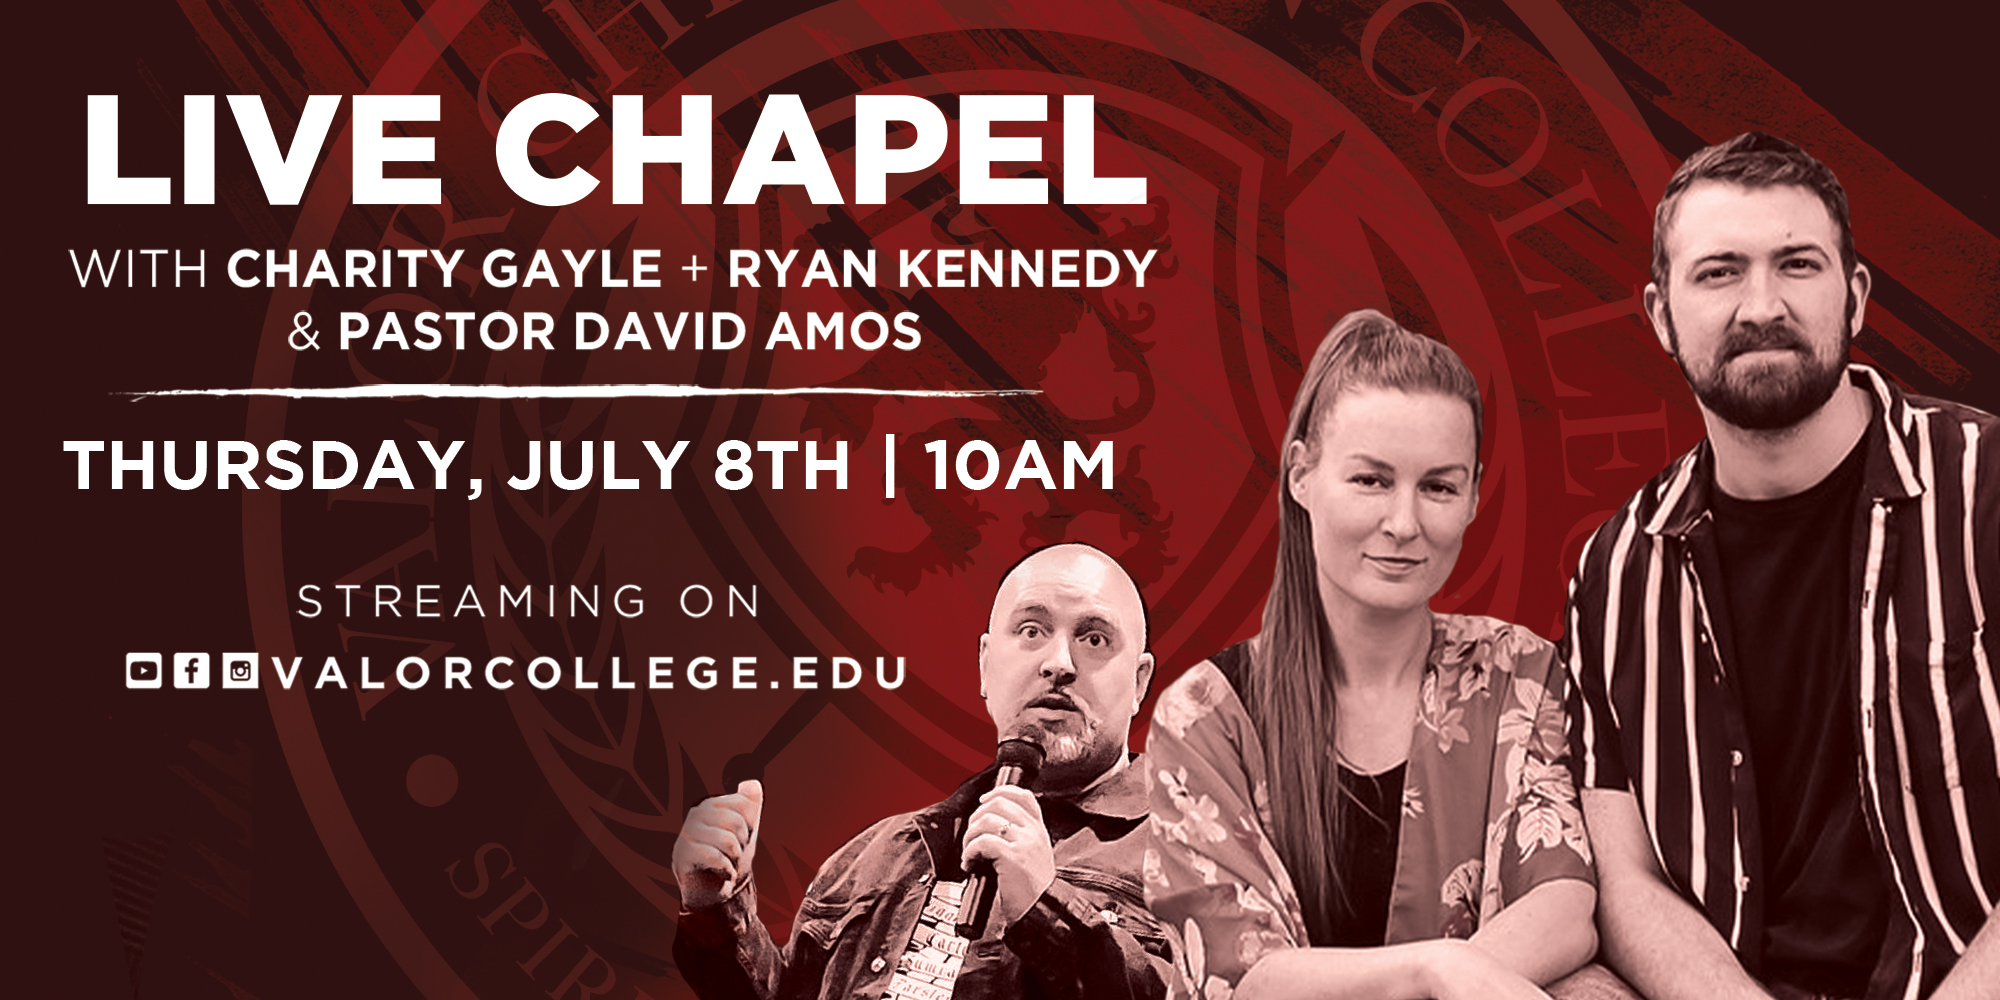 Live Chapel with Charity Gayle, Ryan Kennedy and Pastor David Amos Thursday July 8, 10AM Streaming On Facebook Instagram Youtube ValorCollege.Edu